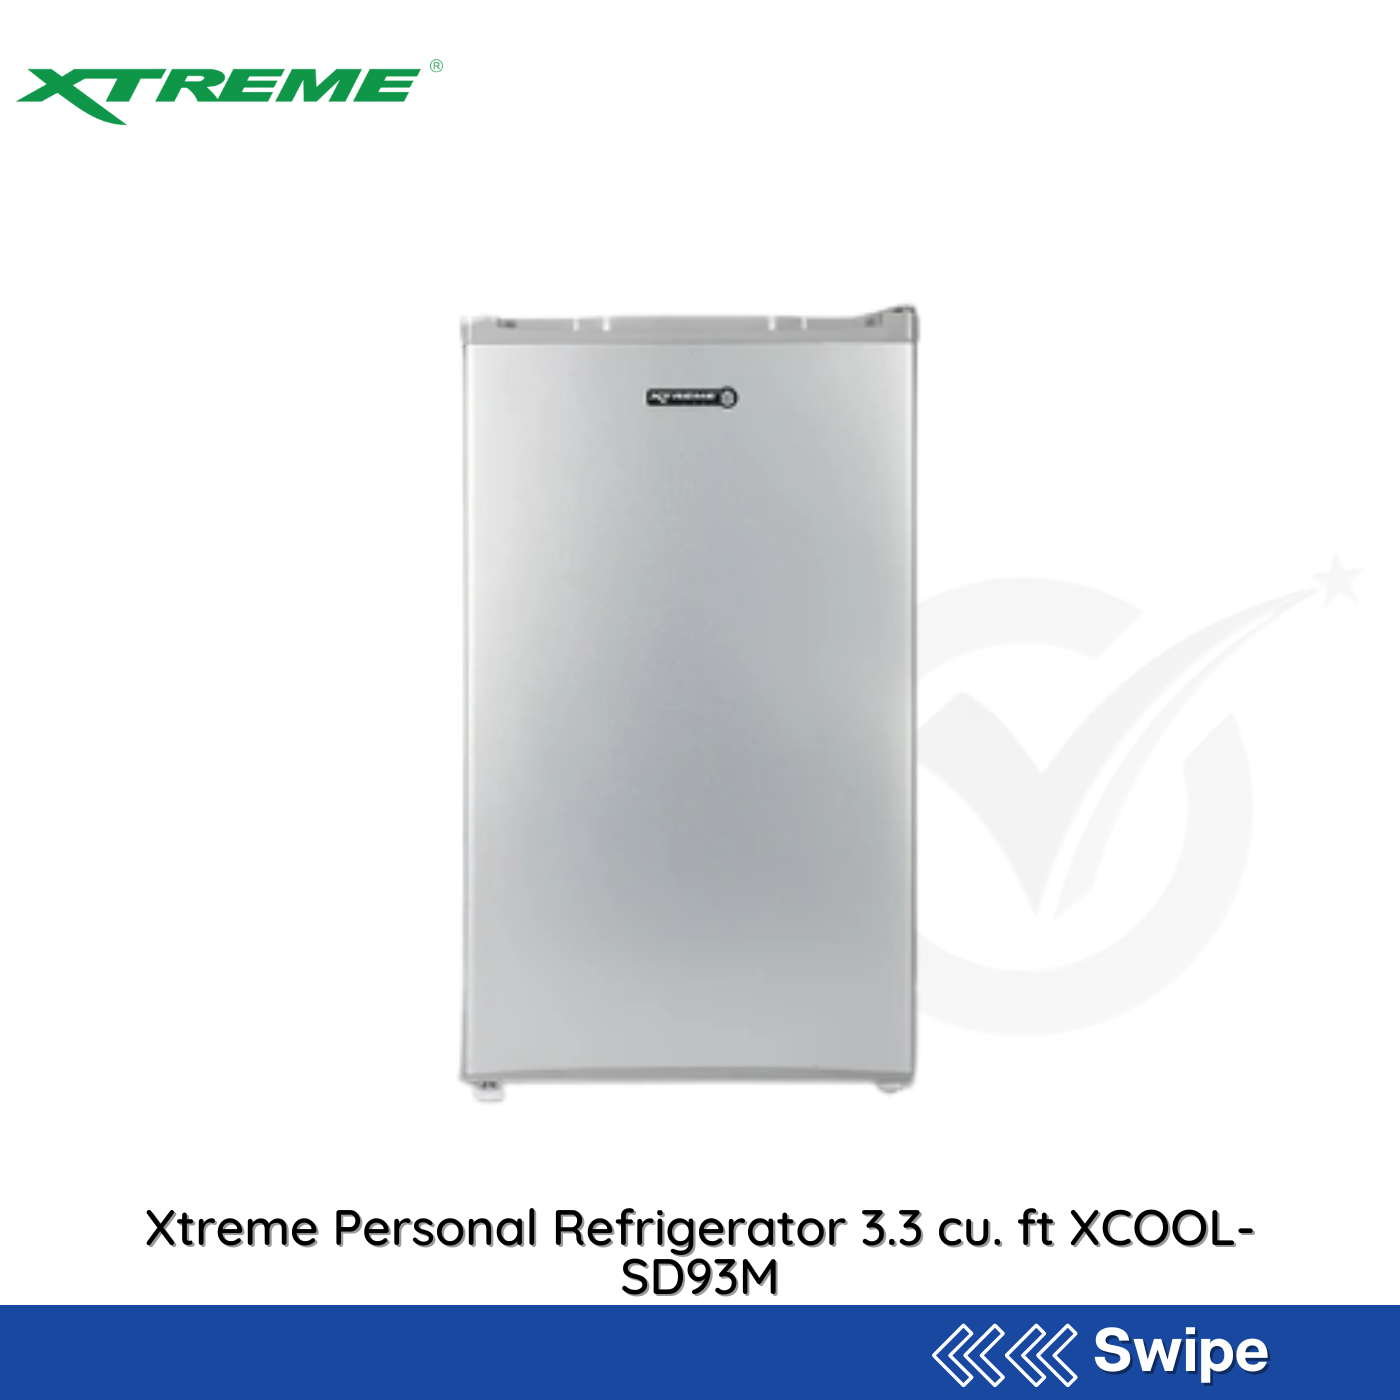 Xtreme Personal Refrigerator 3.3 cu. ft XCOOL-SD93M